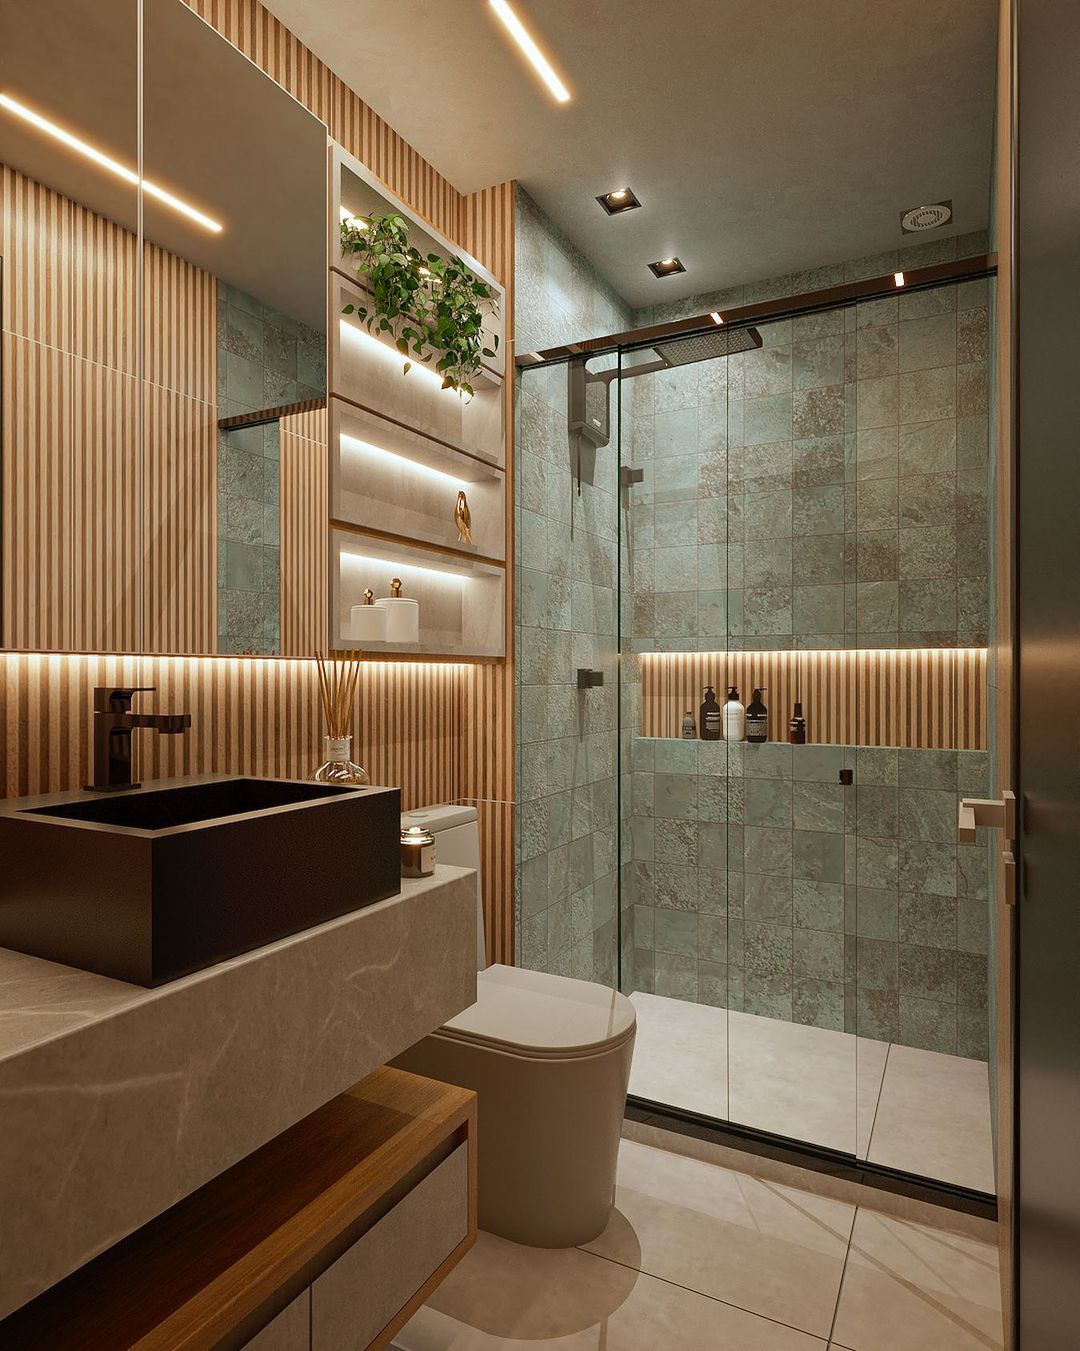 Create Your Dream Bathroom with Stylish Suites